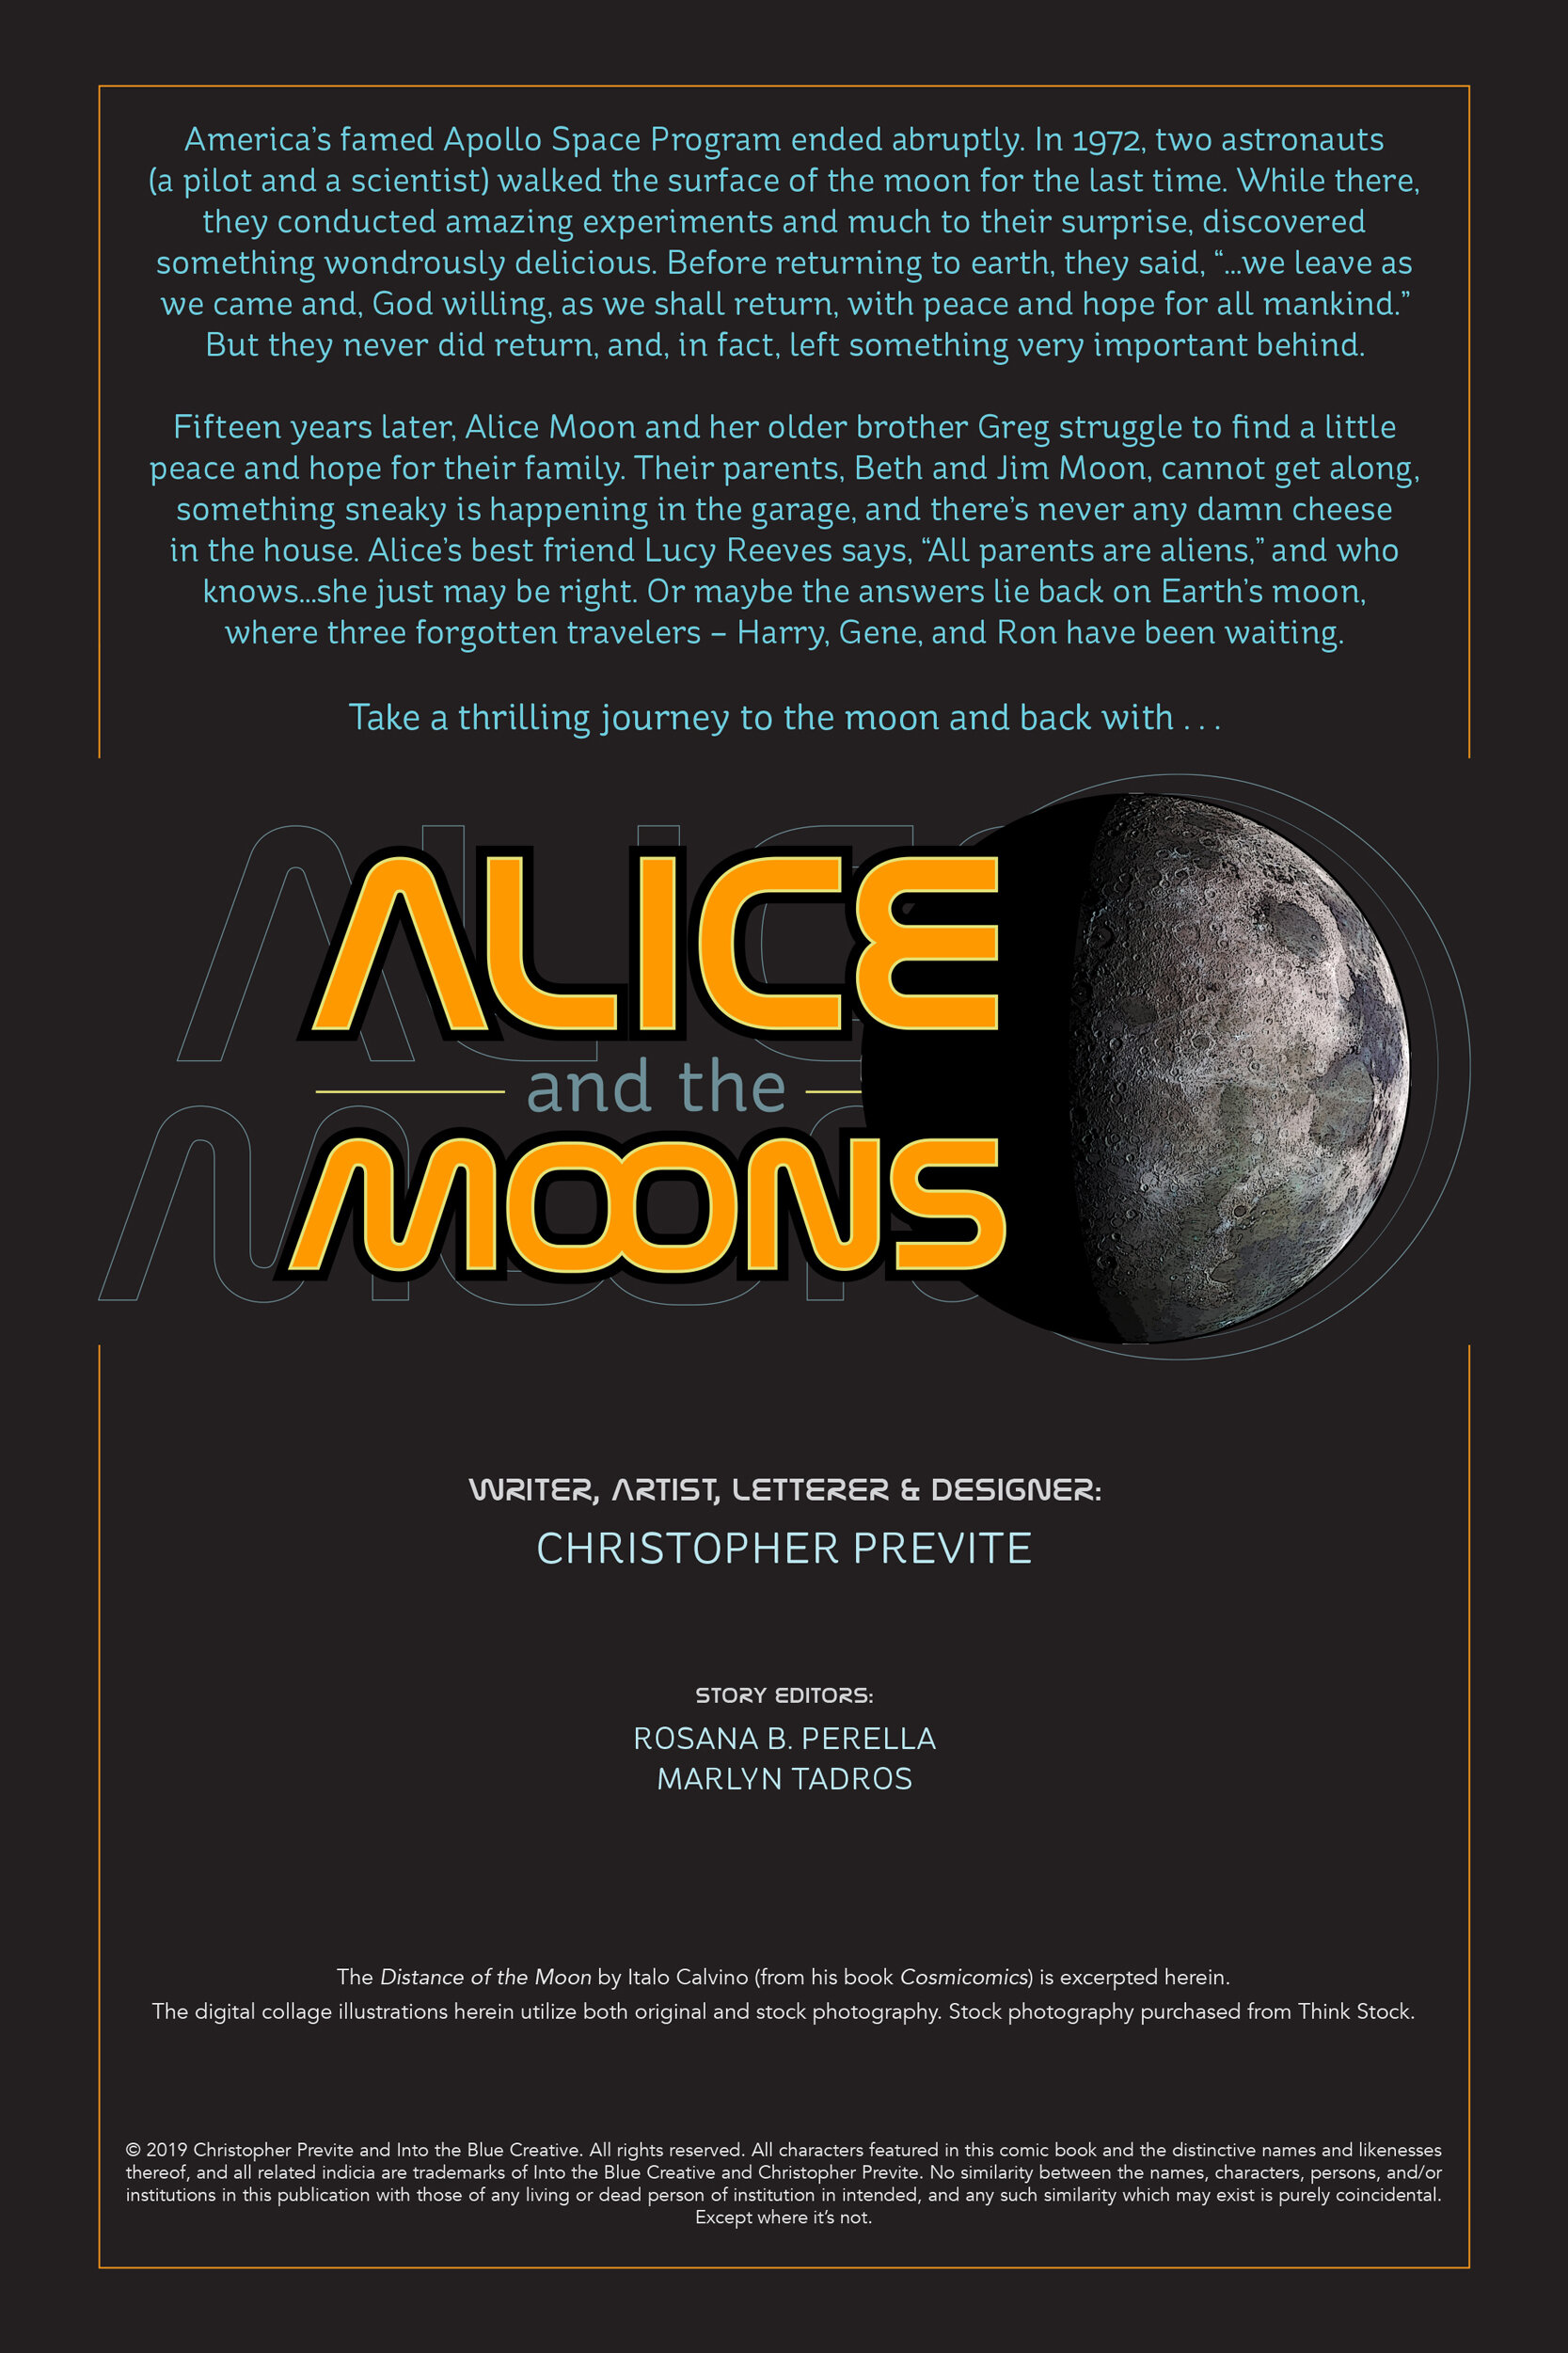 Alice-and-the-Moons_1_01.jpg